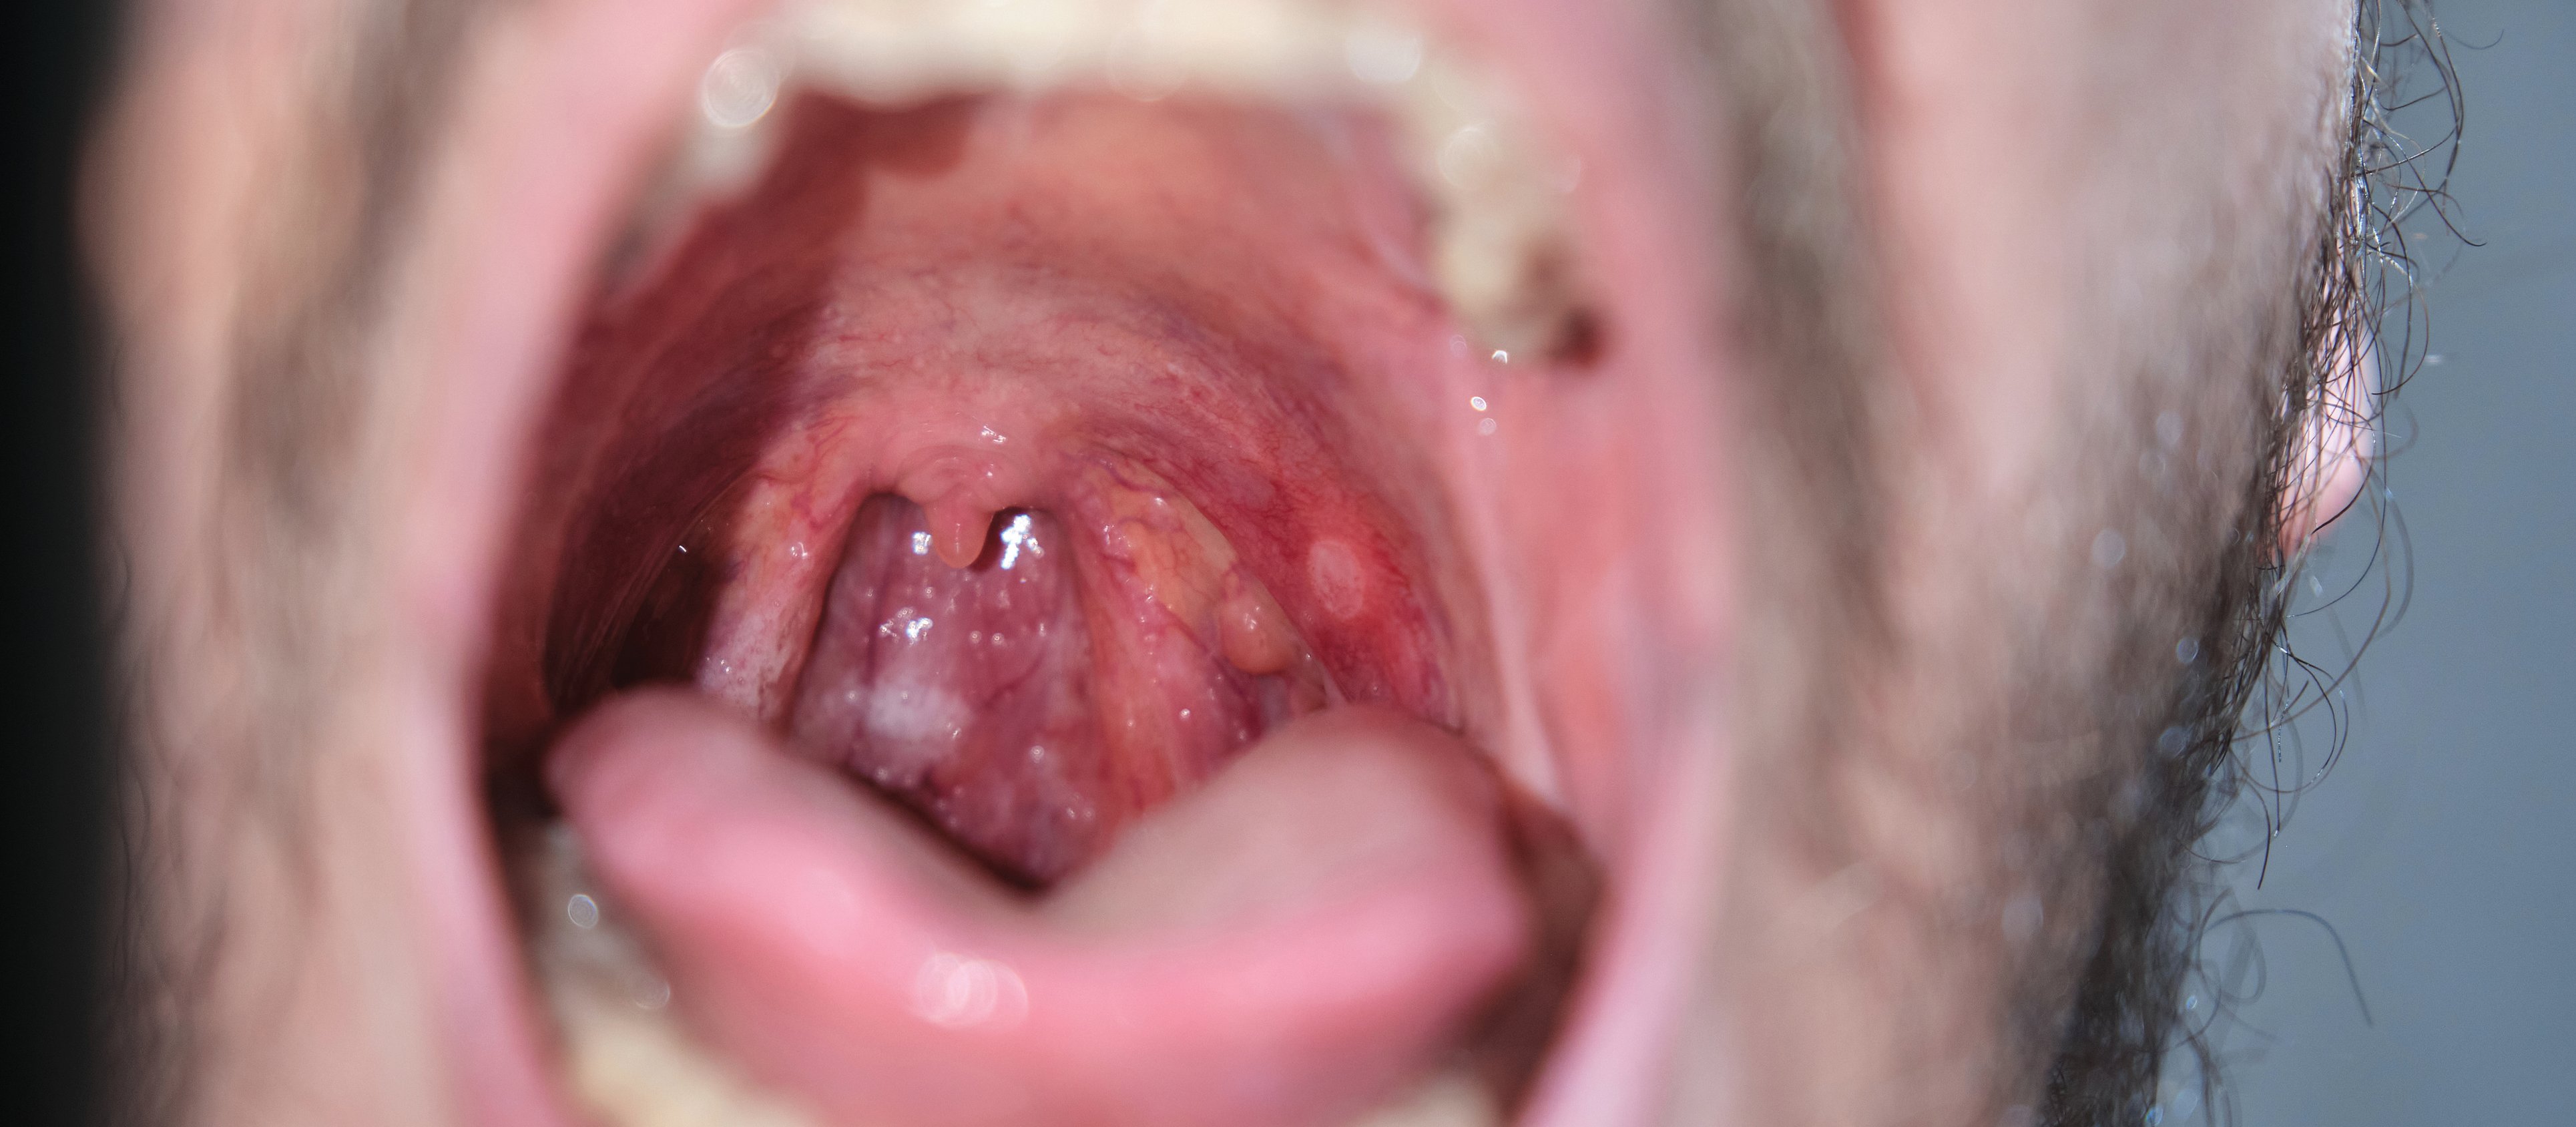 Man with ulcer in mouth